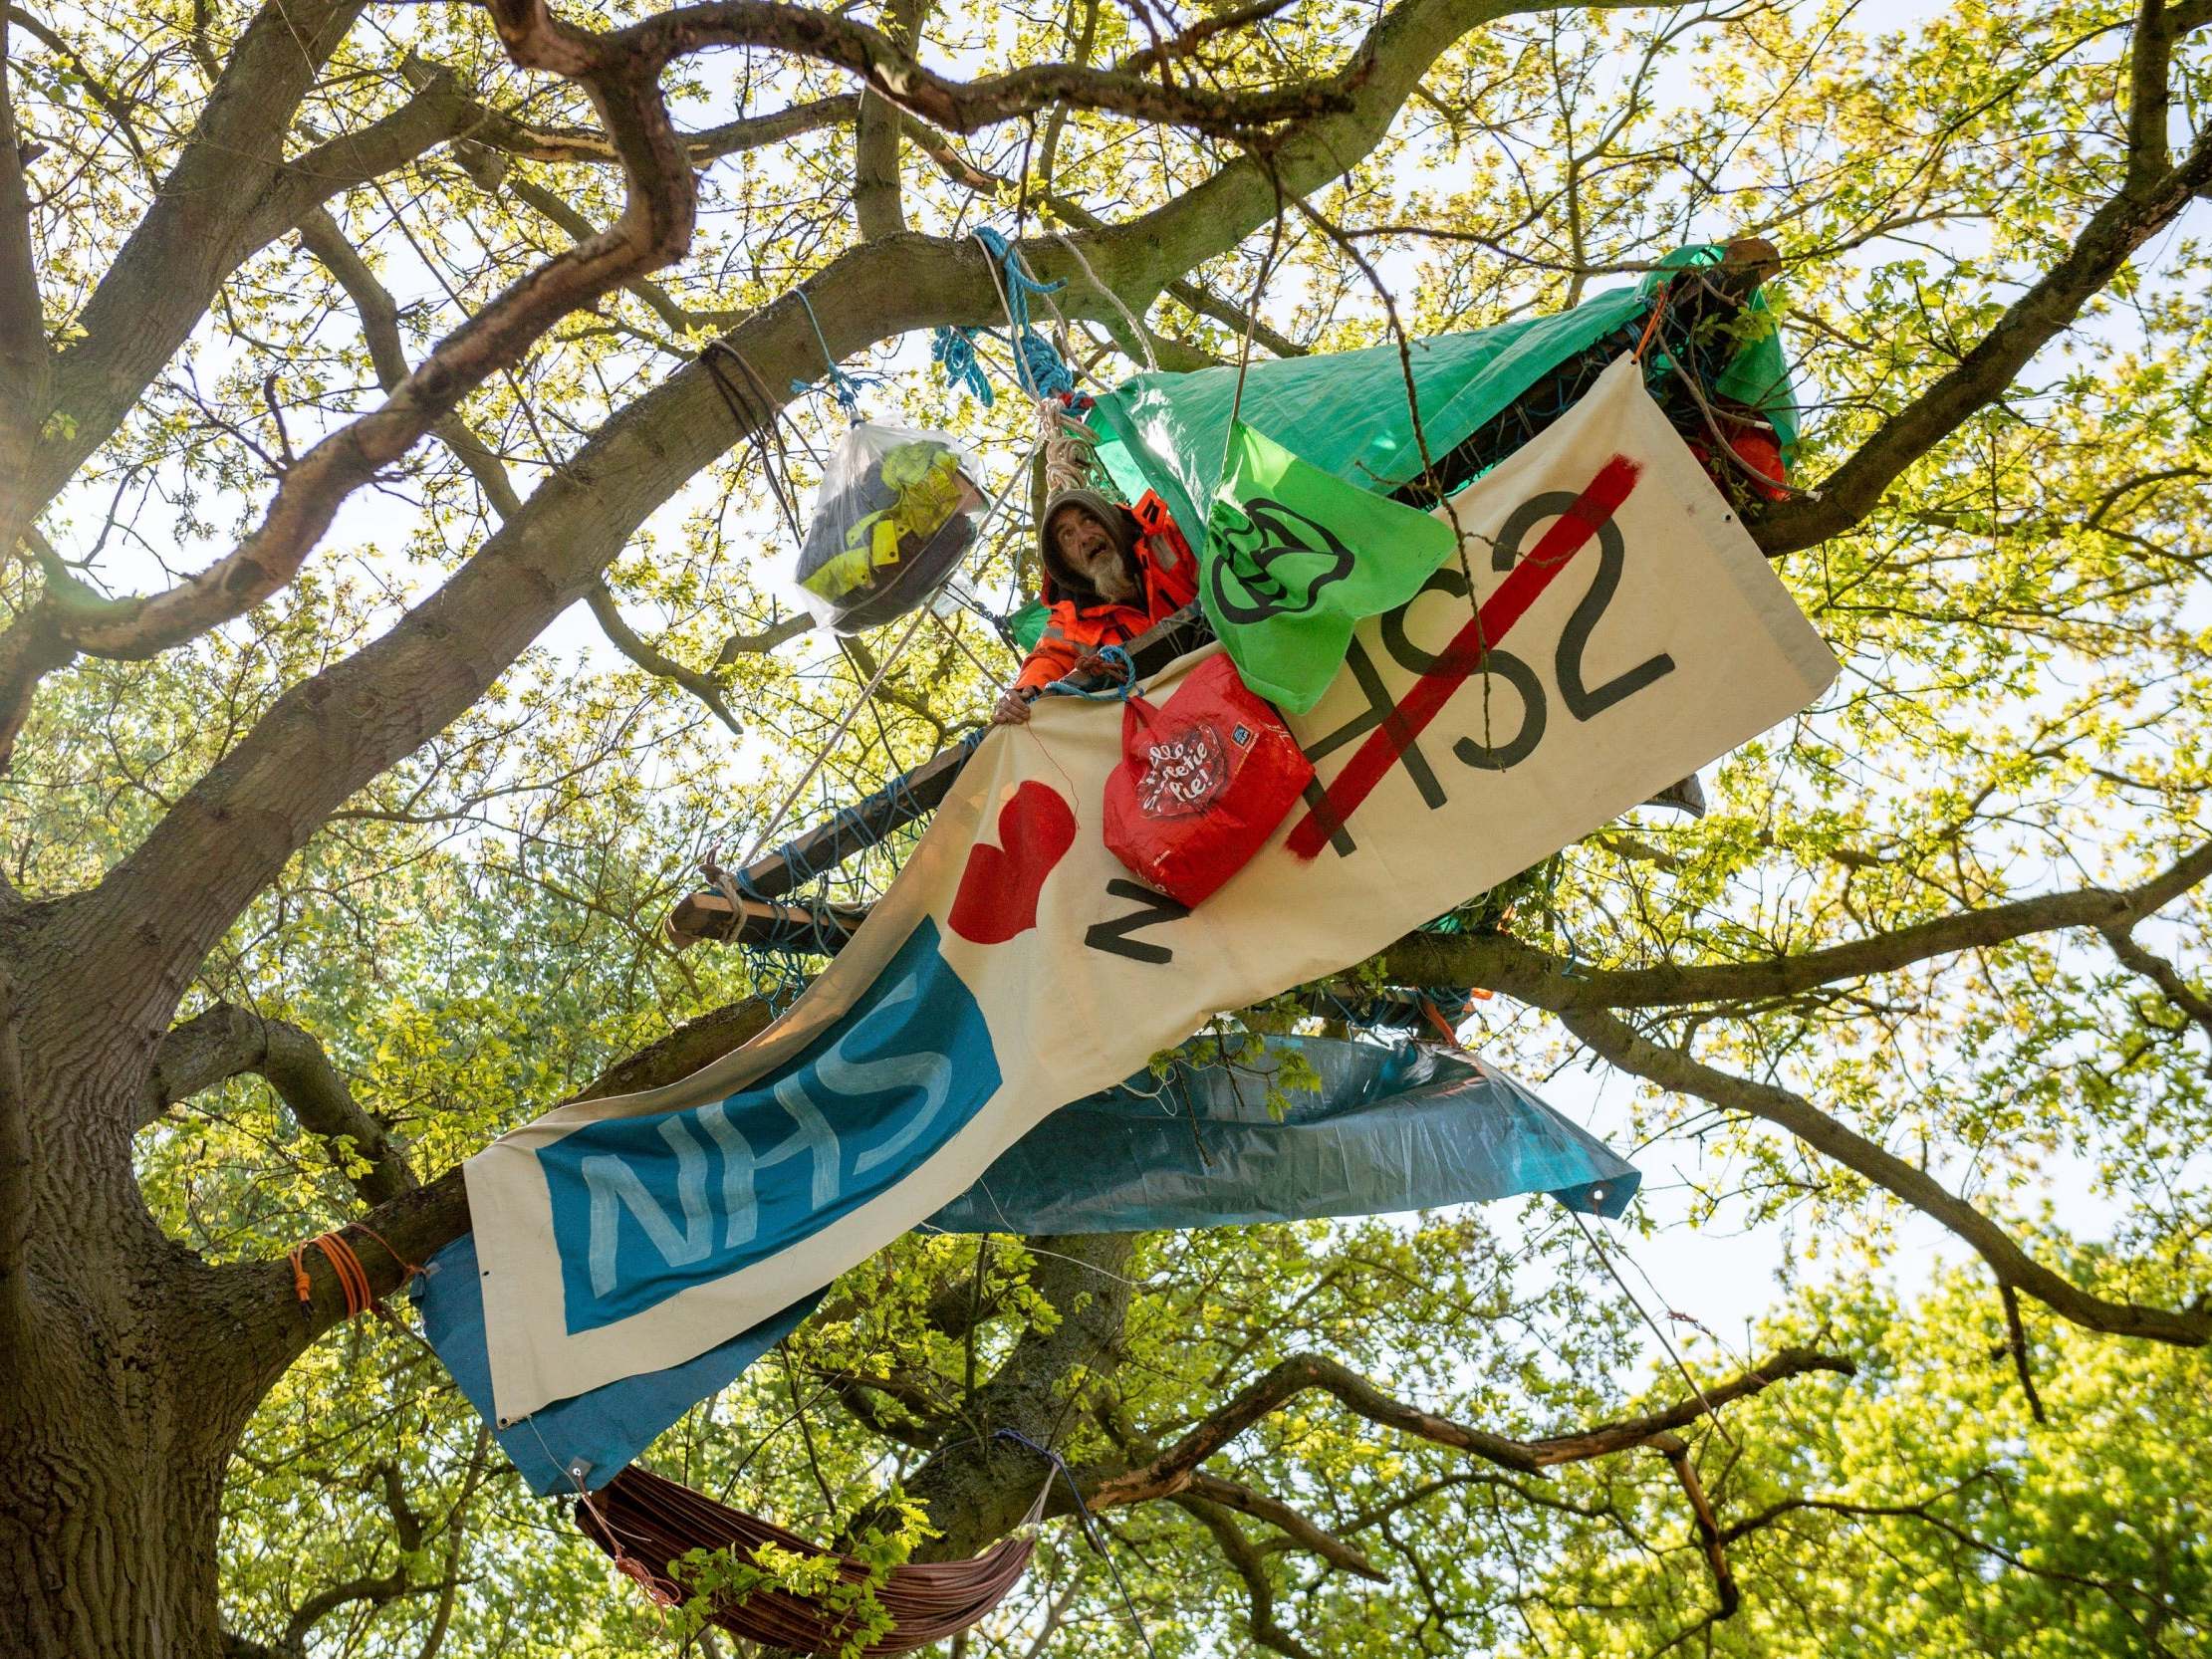 An anti-HS2 protester named Potts positioned in a tree in Crackley Woods, near Kenilworth, Warwickshire